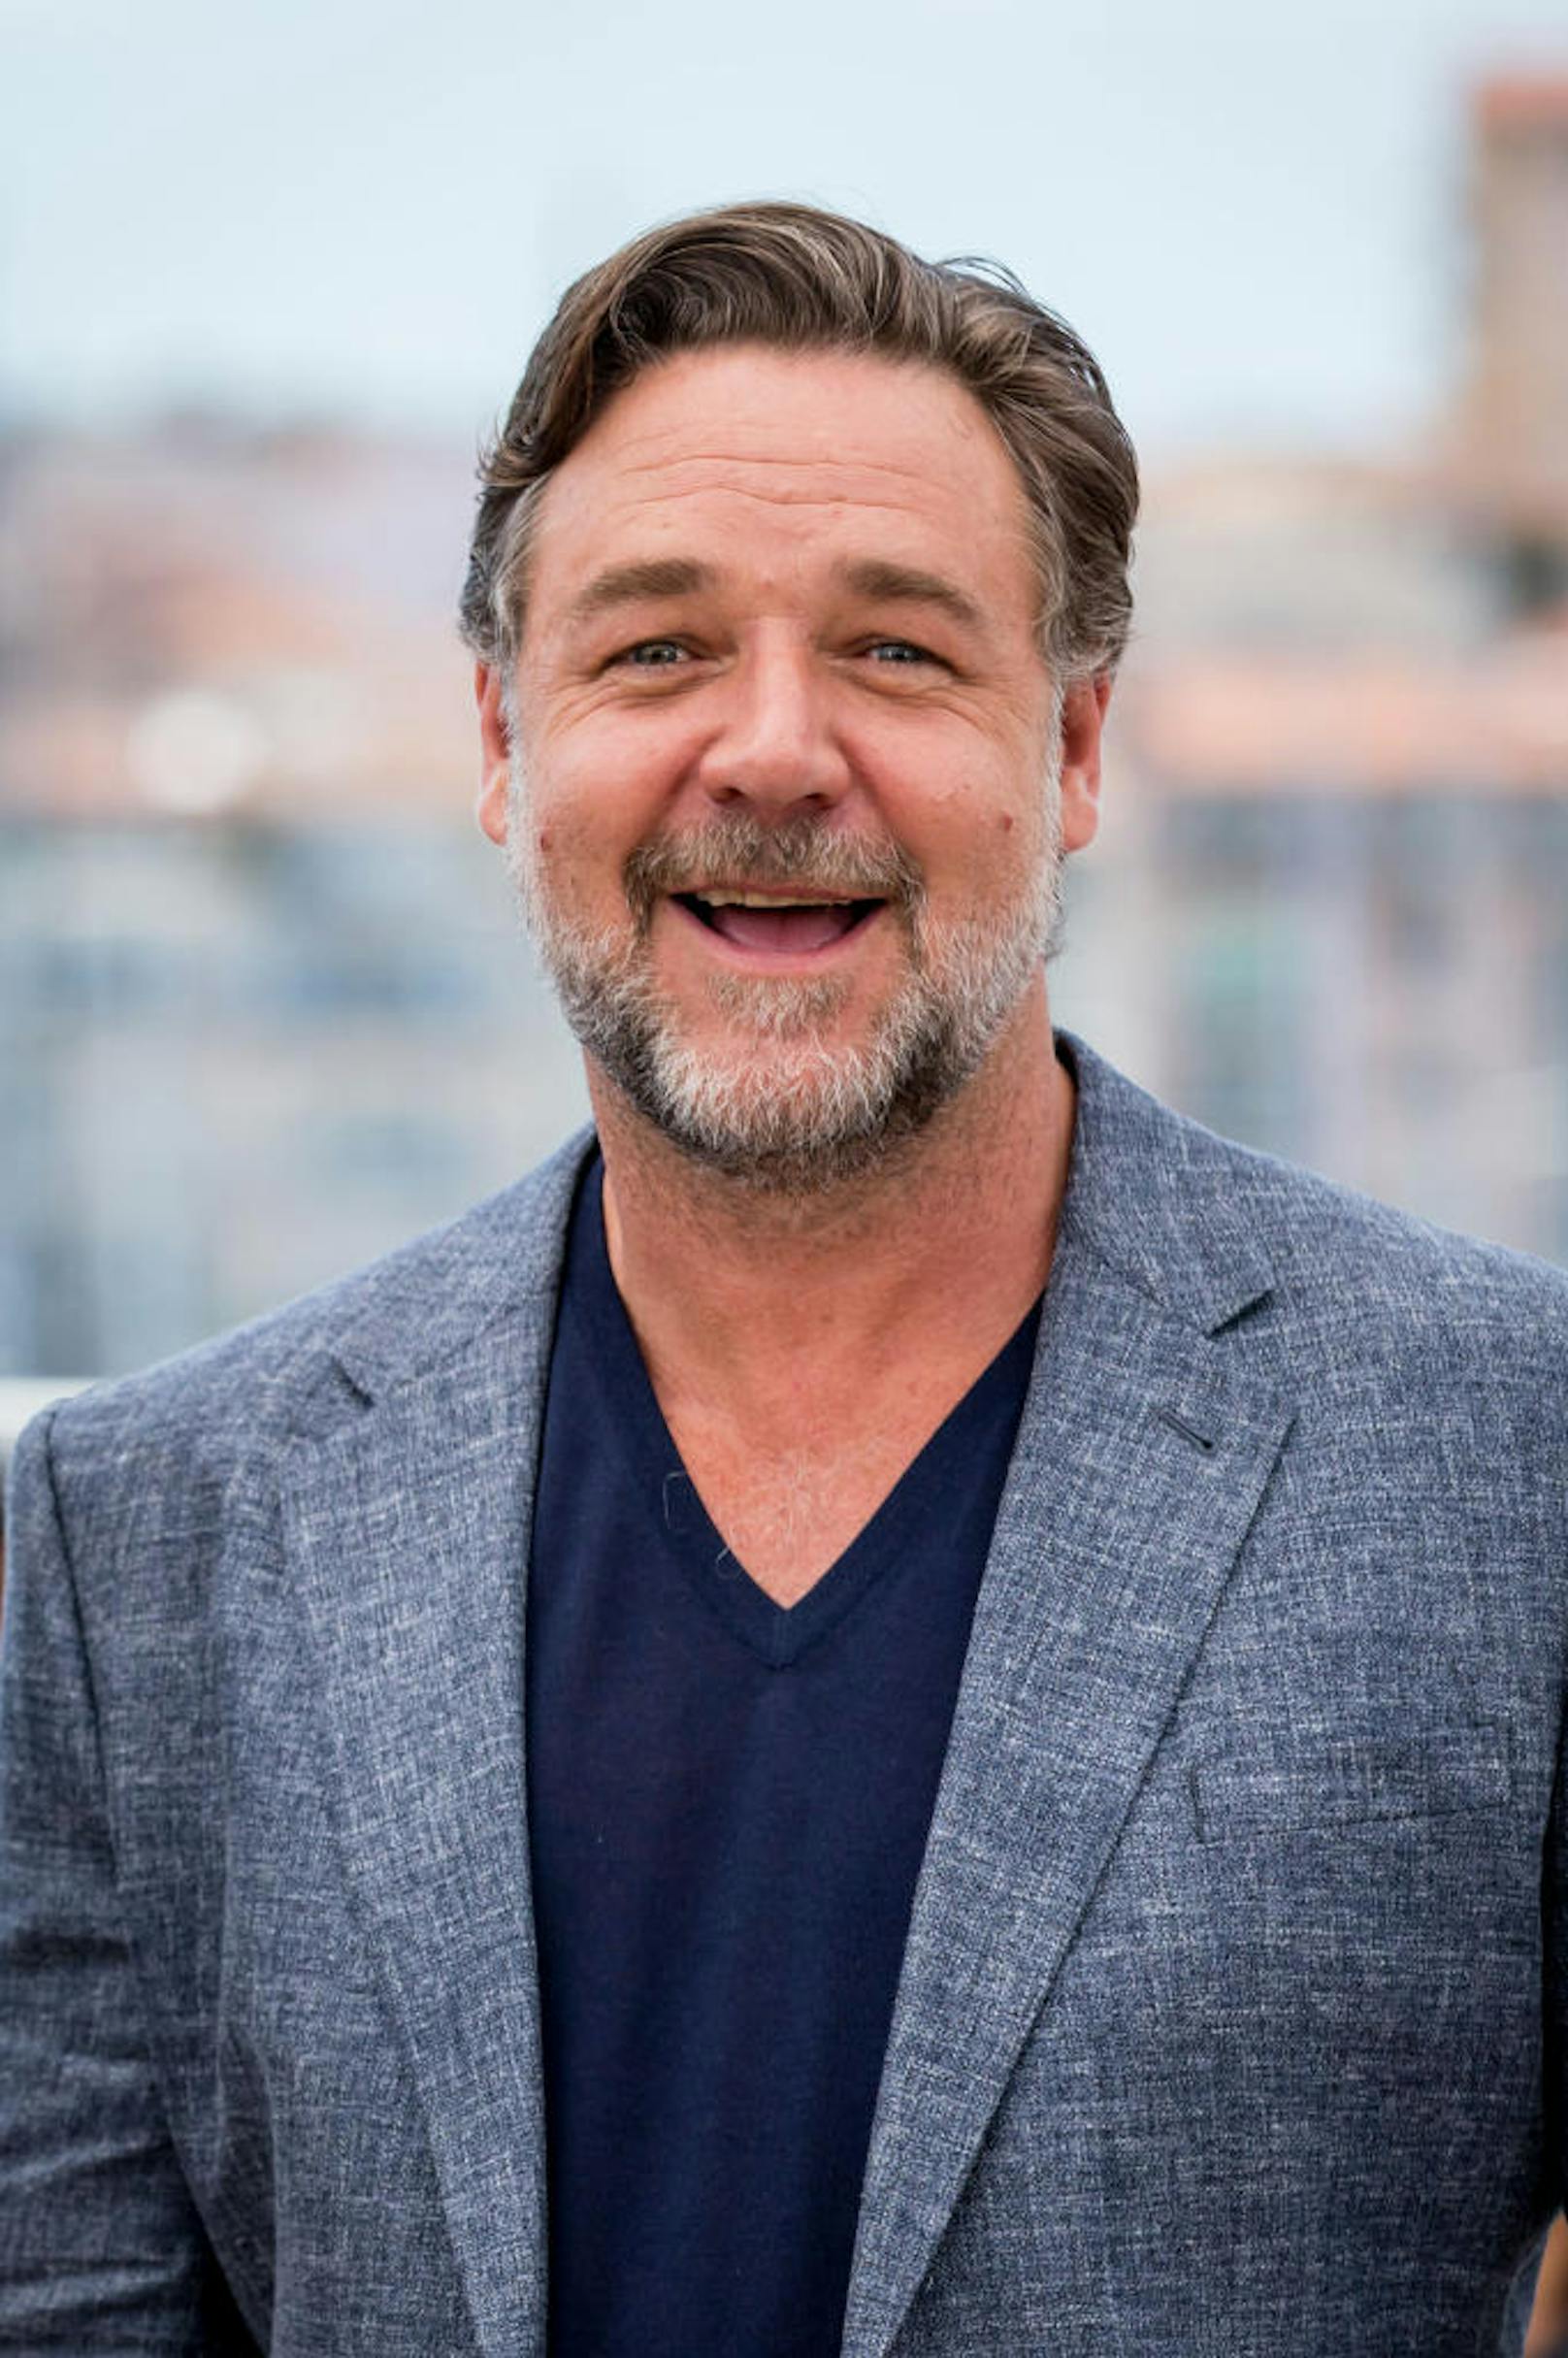 Russell Crowe 2016 in "The Nice Guys"